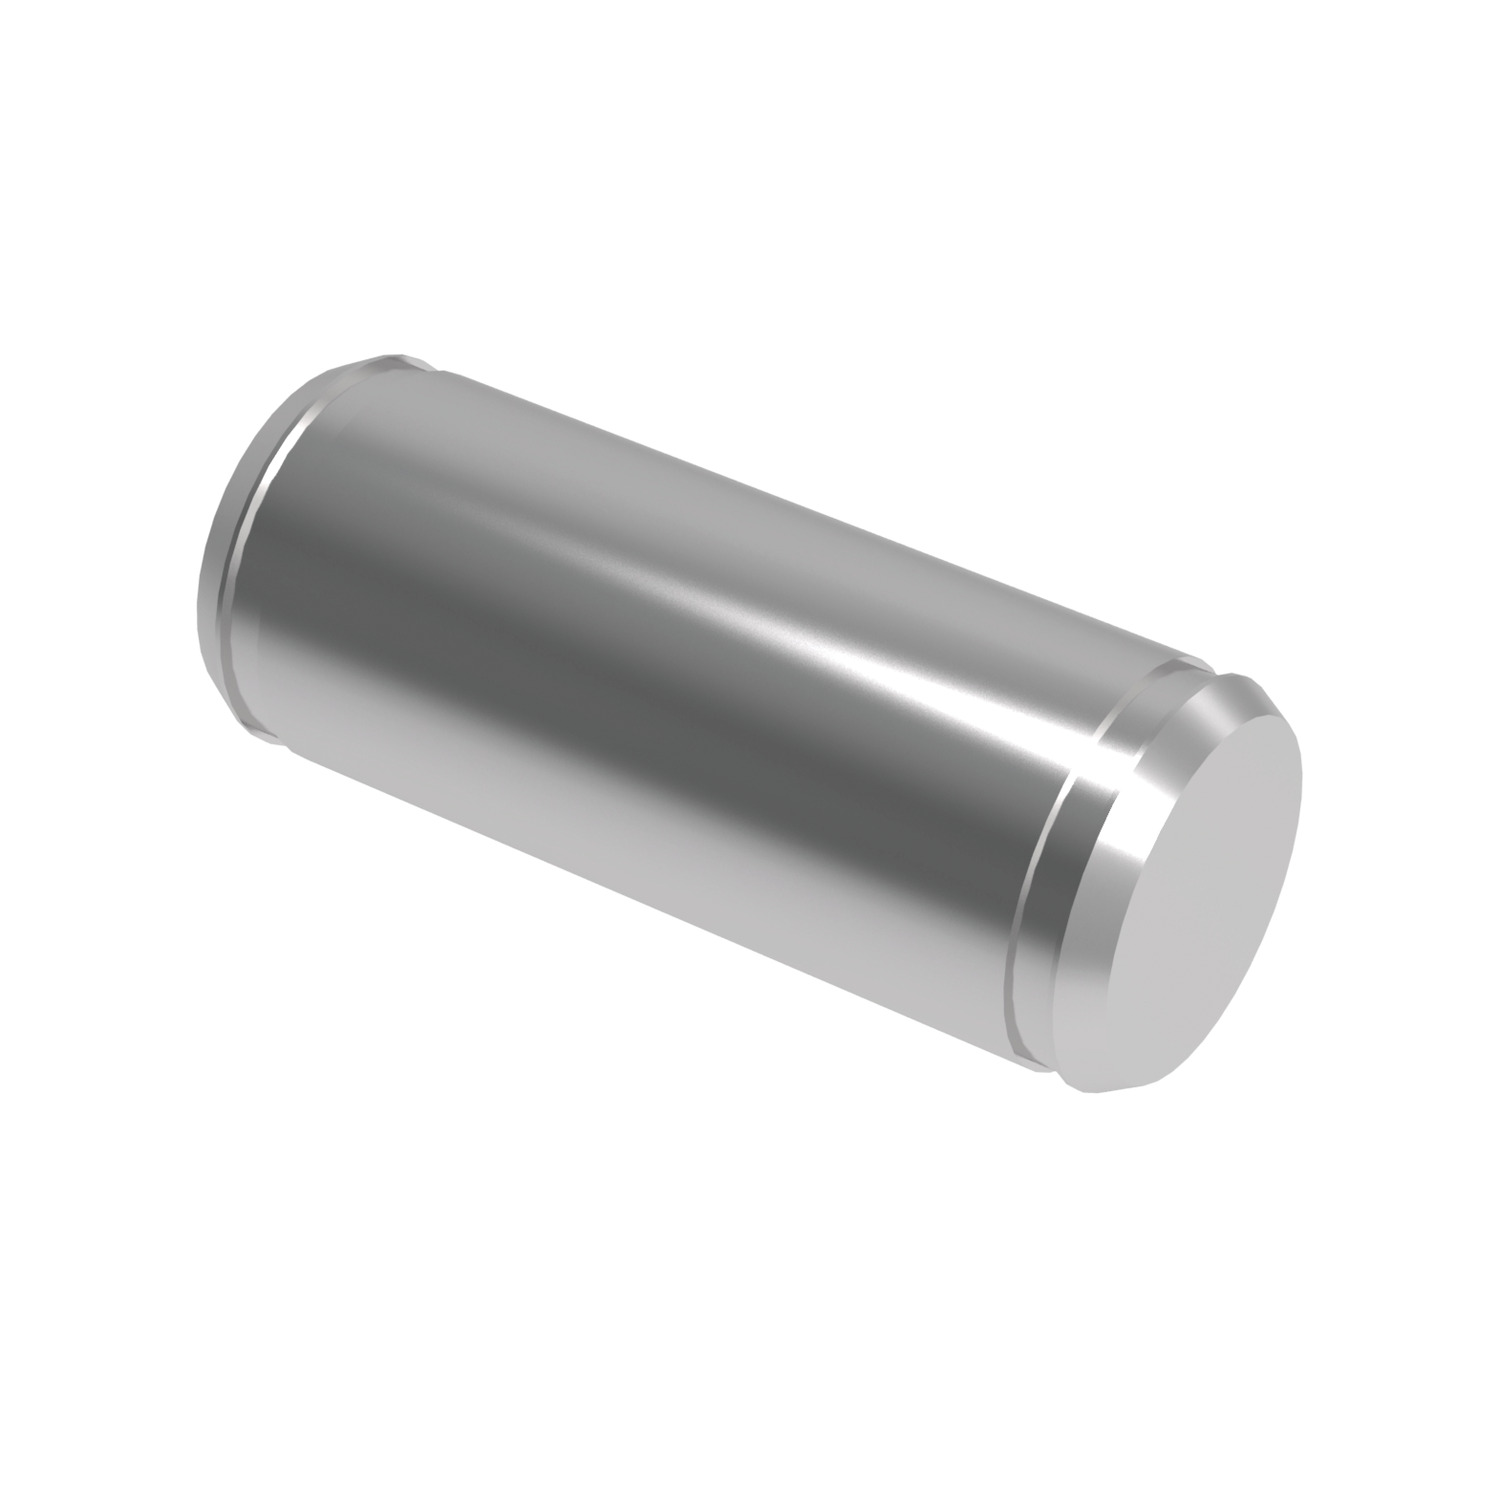 Stainless Clevis Pin Stainless steel clevis pins in stock. For use with R3402 - R3403 (clevis joints) and R3447 (circlips)